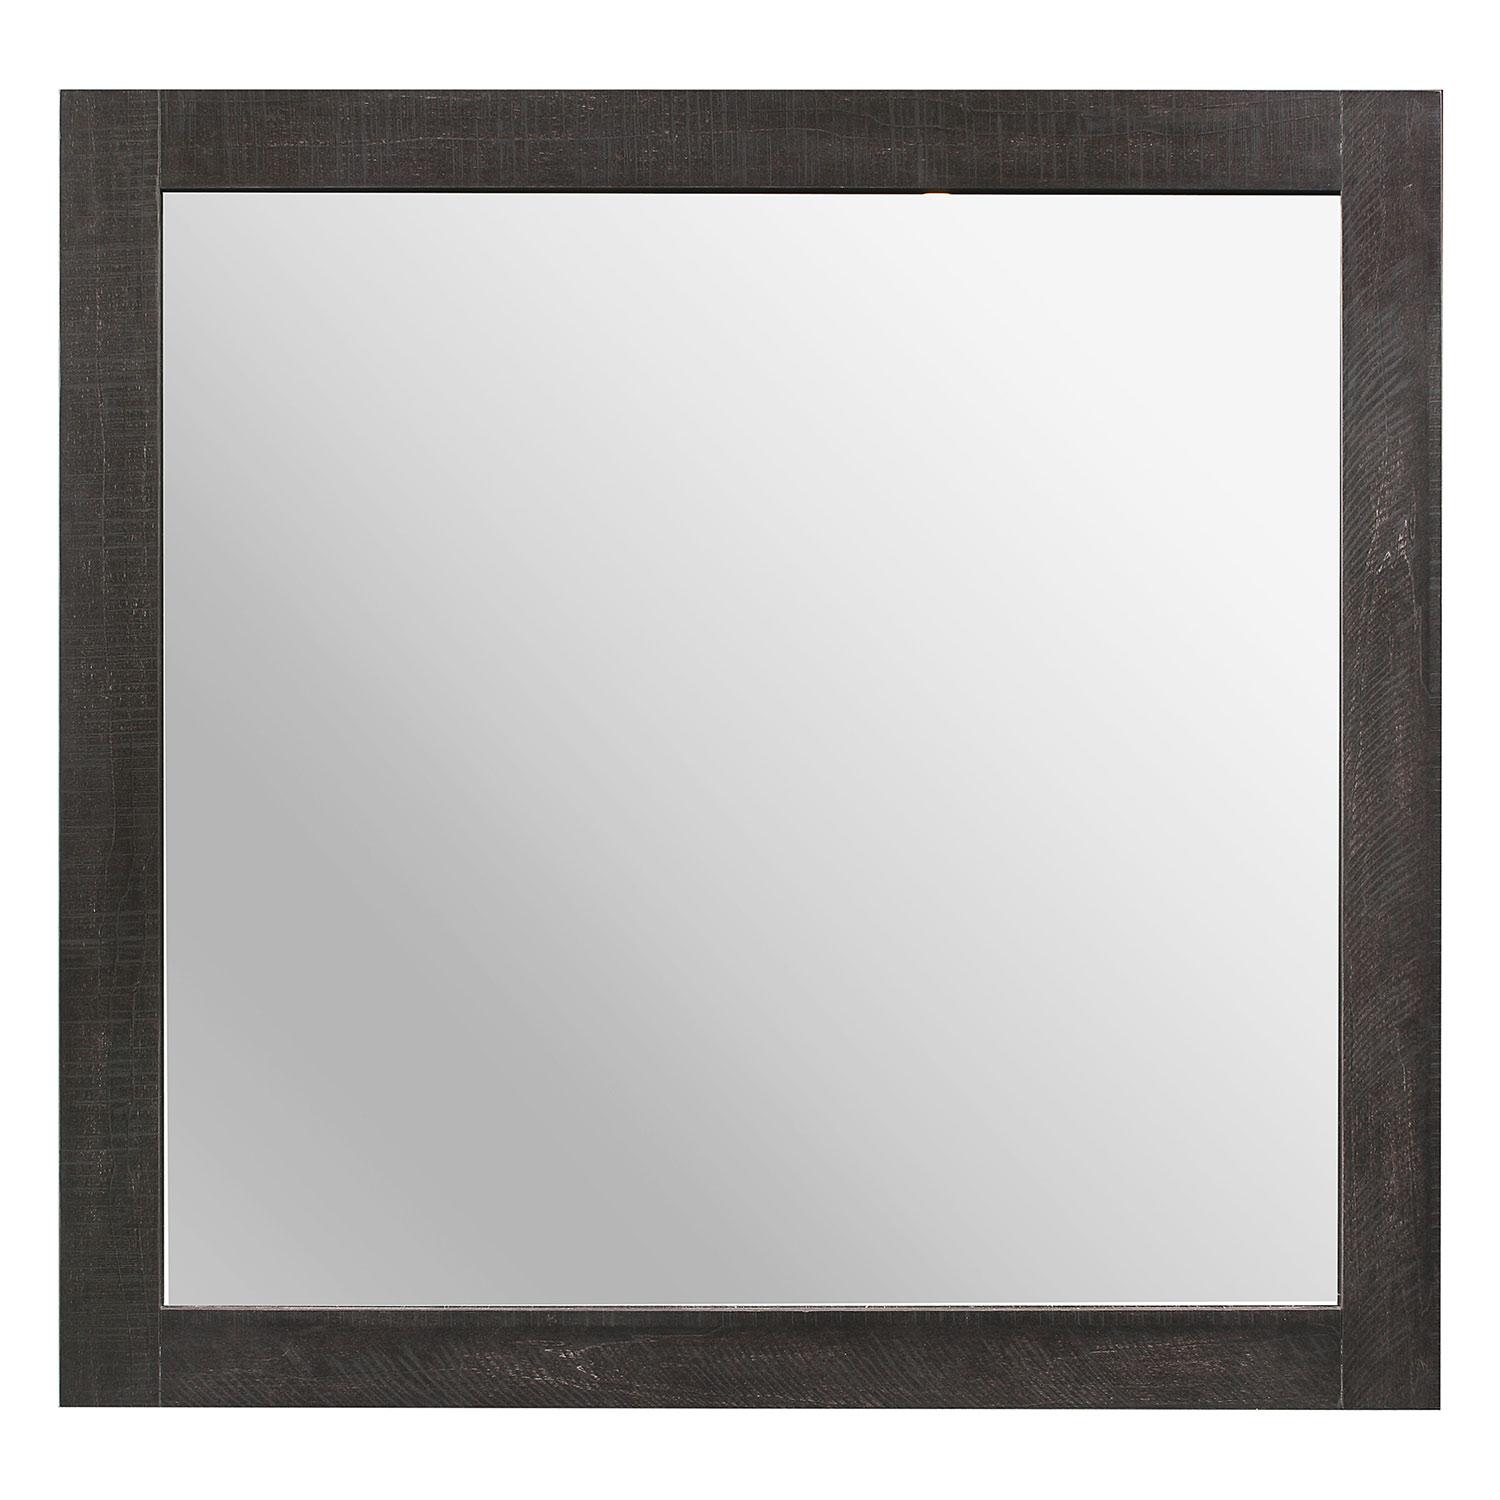 Homelegance Cooper Mirror - Wire-brushed multi-tone